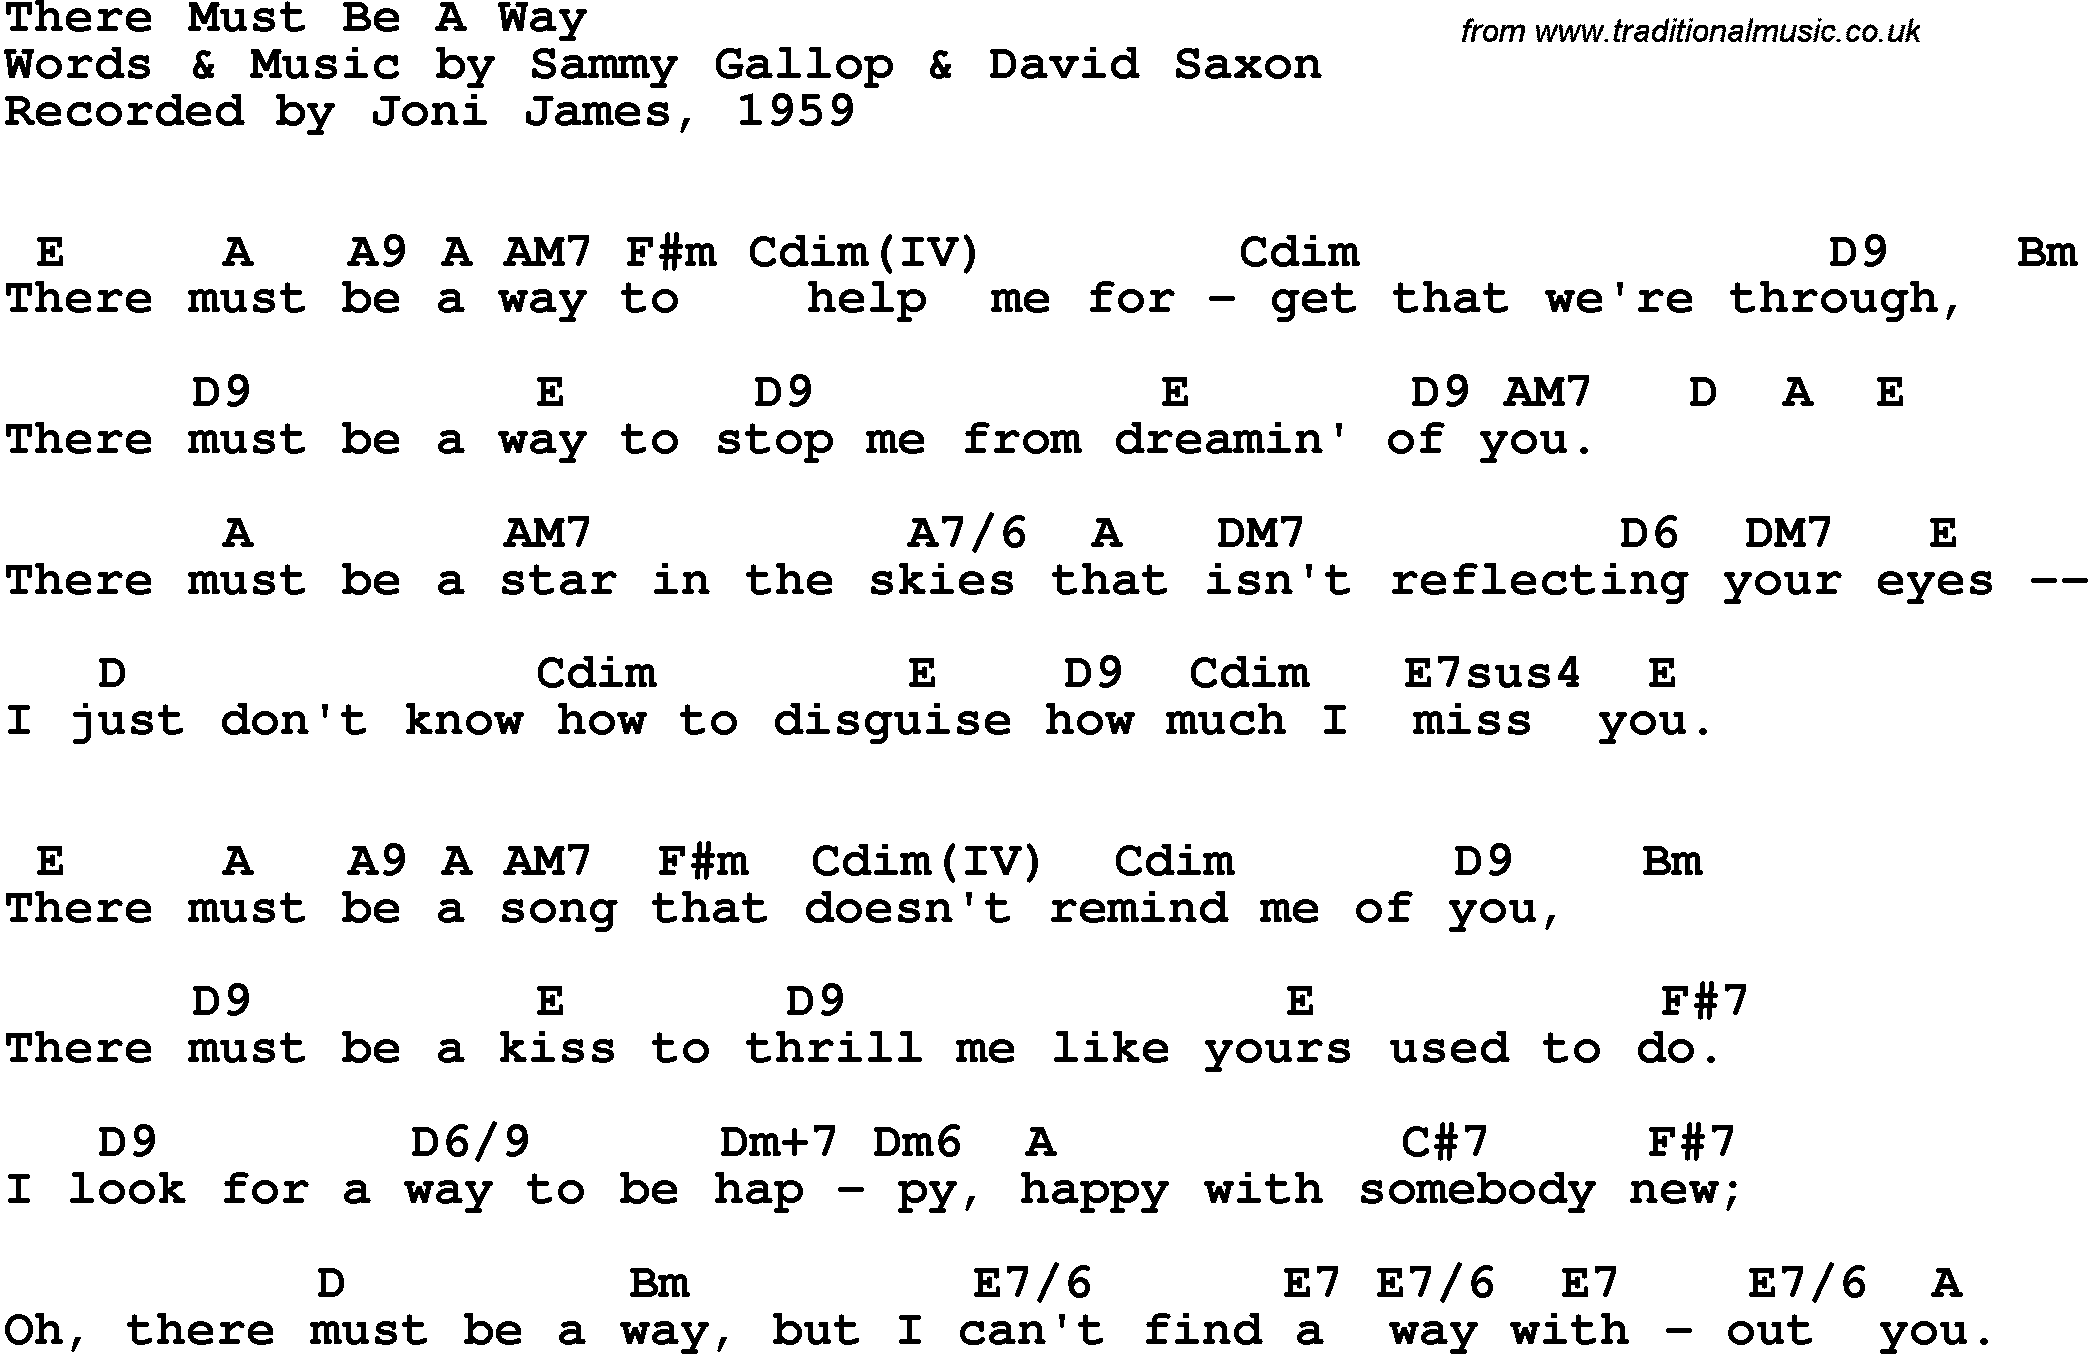 Song Lyrics with guitar chords for There Must Be A Way - Joni James, 1959